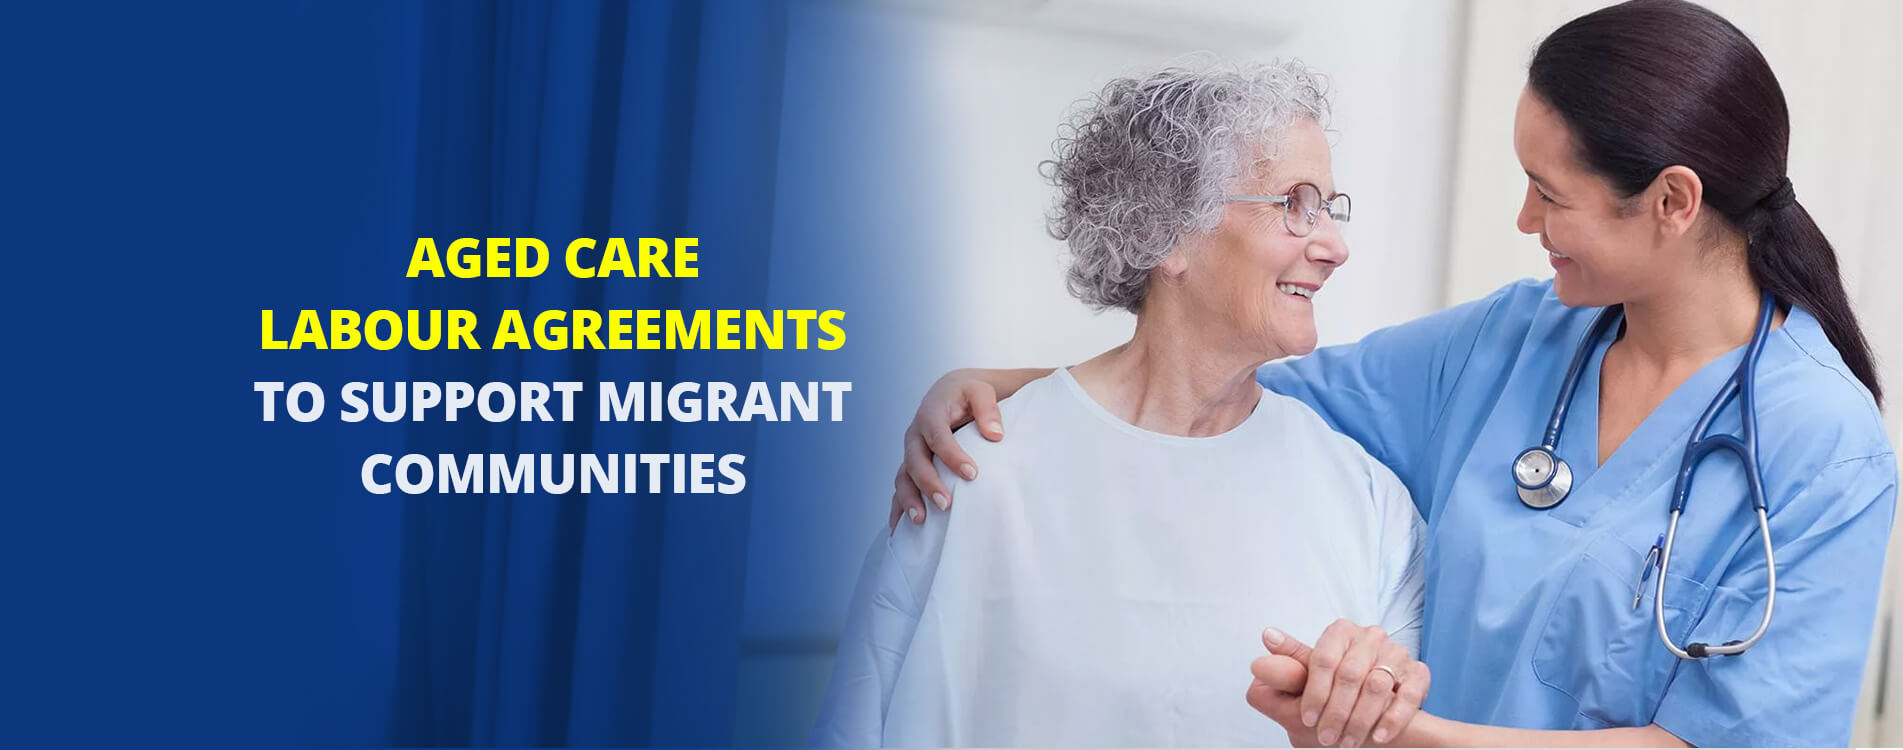 Aged Care Labour Agreements to Support Migrant Communities